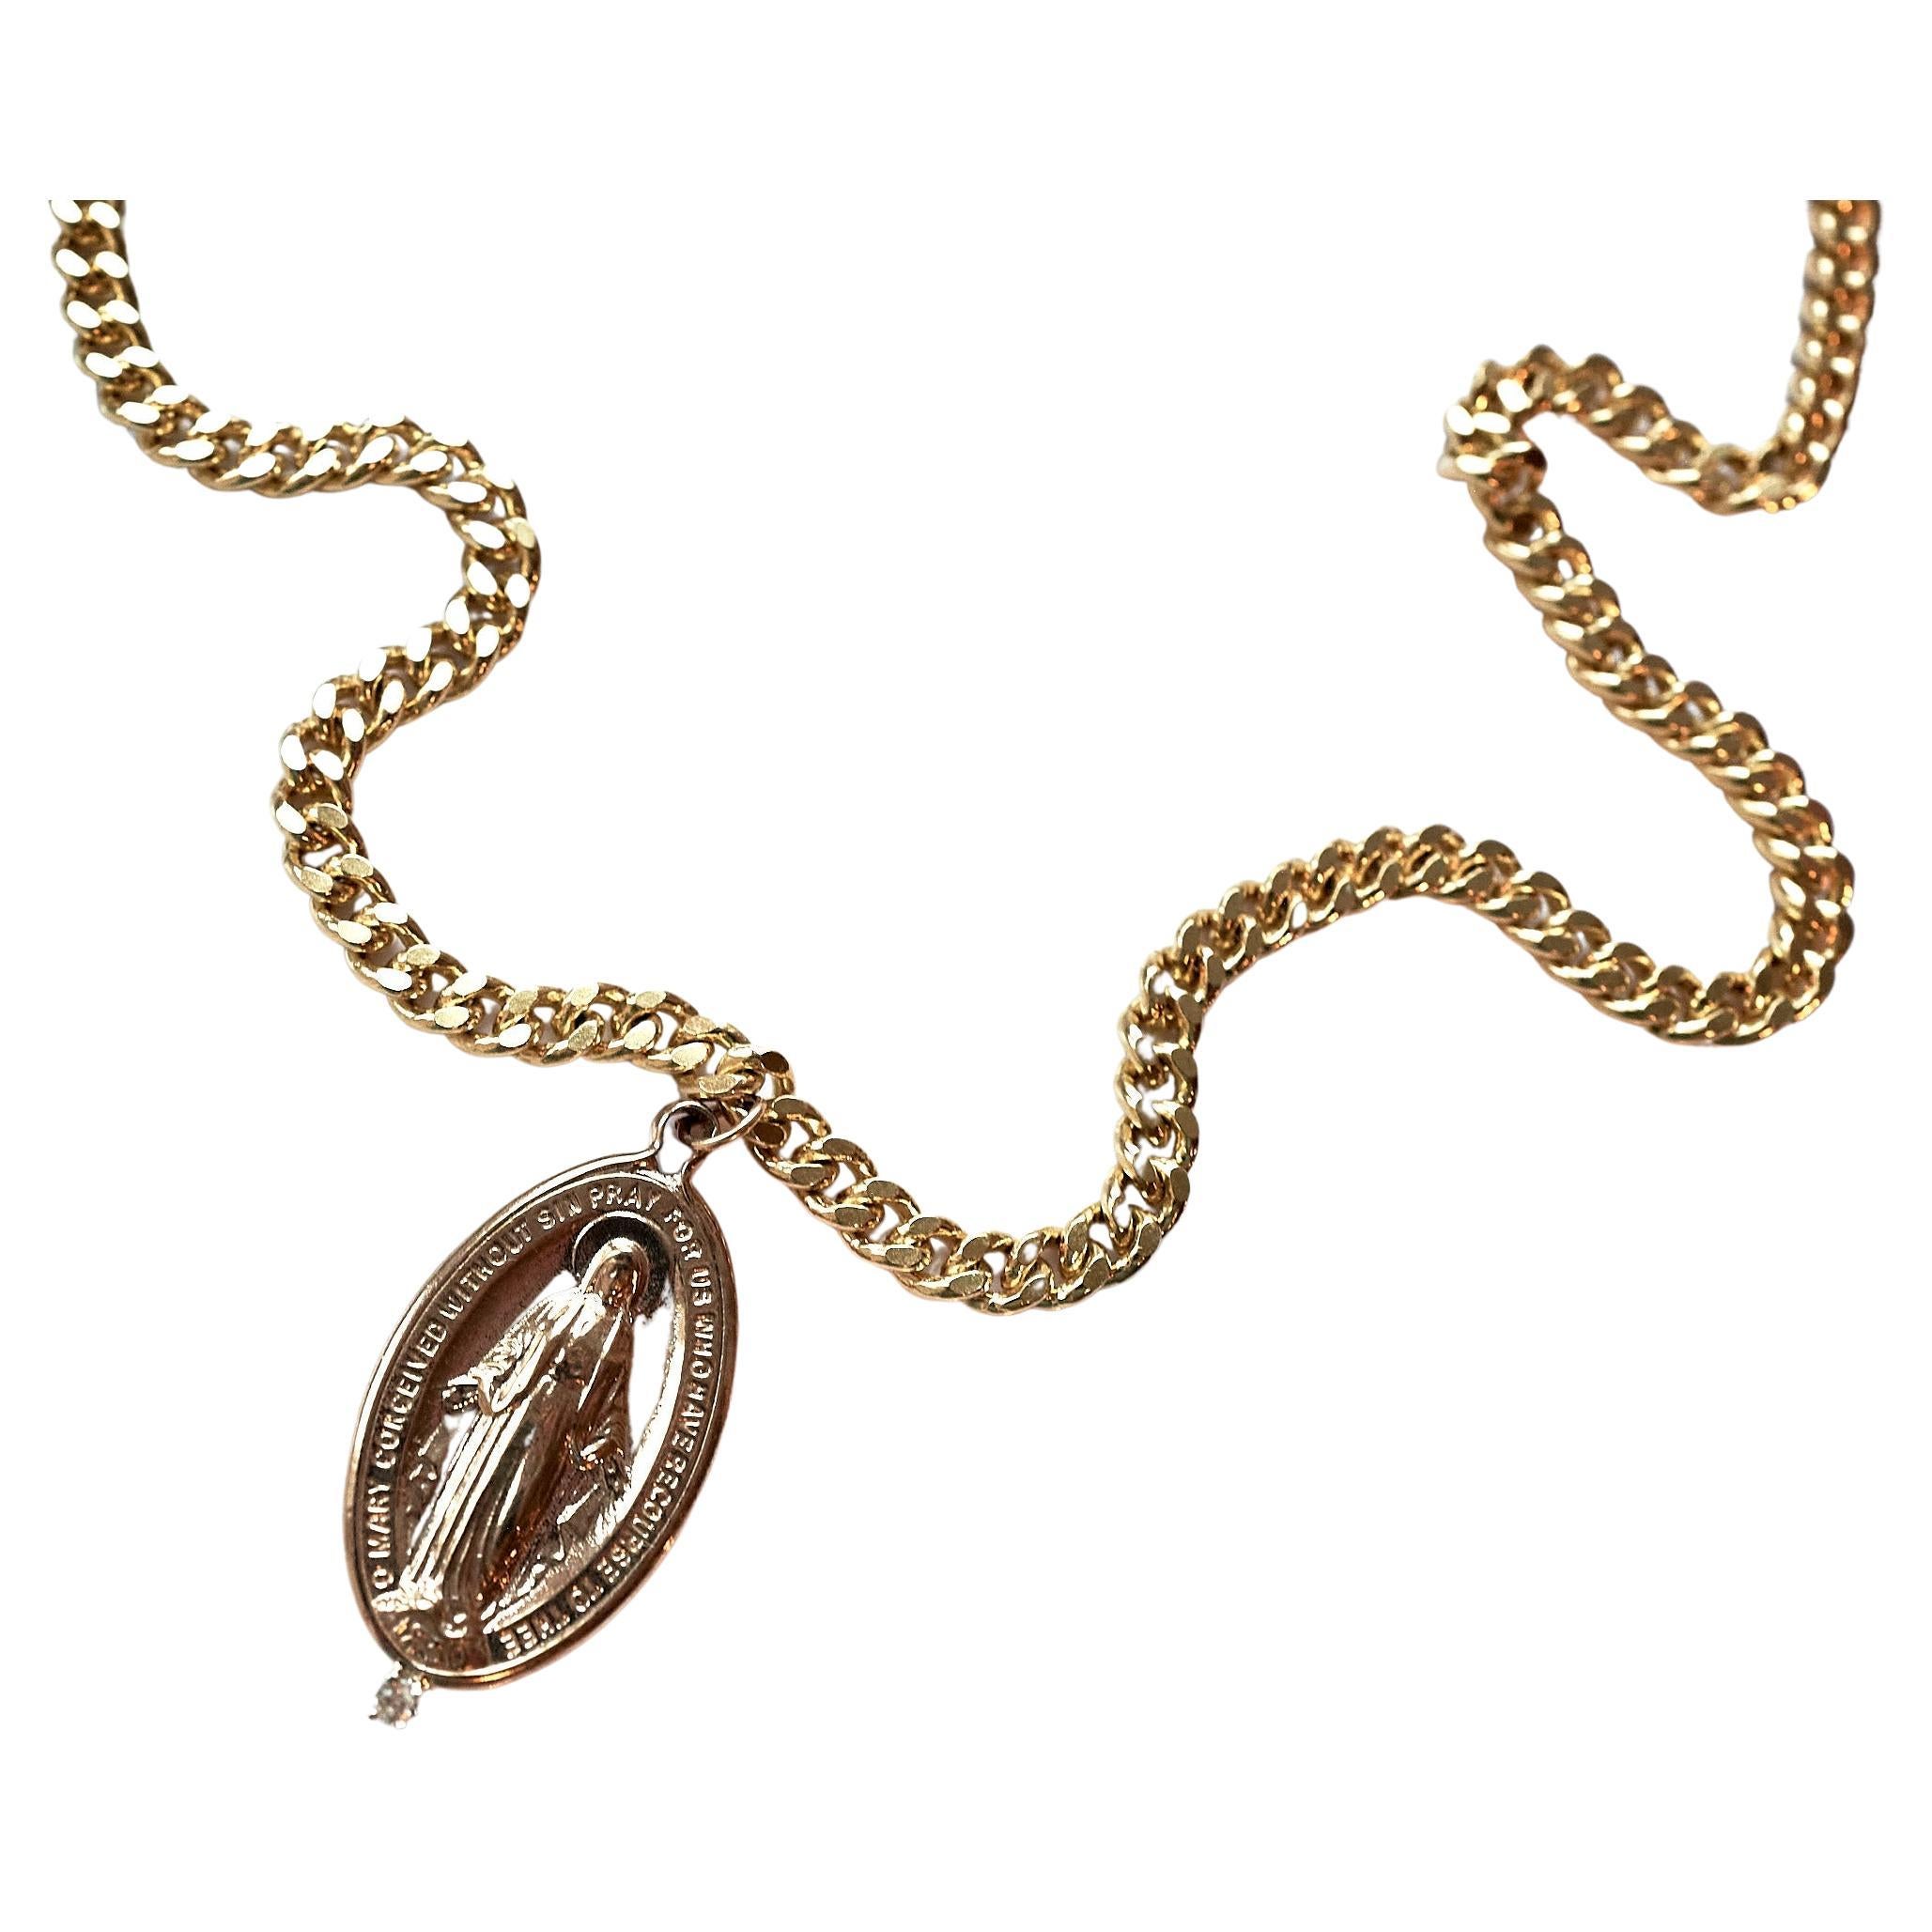 White Medal Virgin Mary Oval Medal Chain Necklace J Dauphin
Designer: J Dauphin
10k Gold Plated Chain
Medal Bronze

Symbols or medals can become a powerful tool in our arsenal for the spiritual. 
Since ancient times spiritual pendants, religious